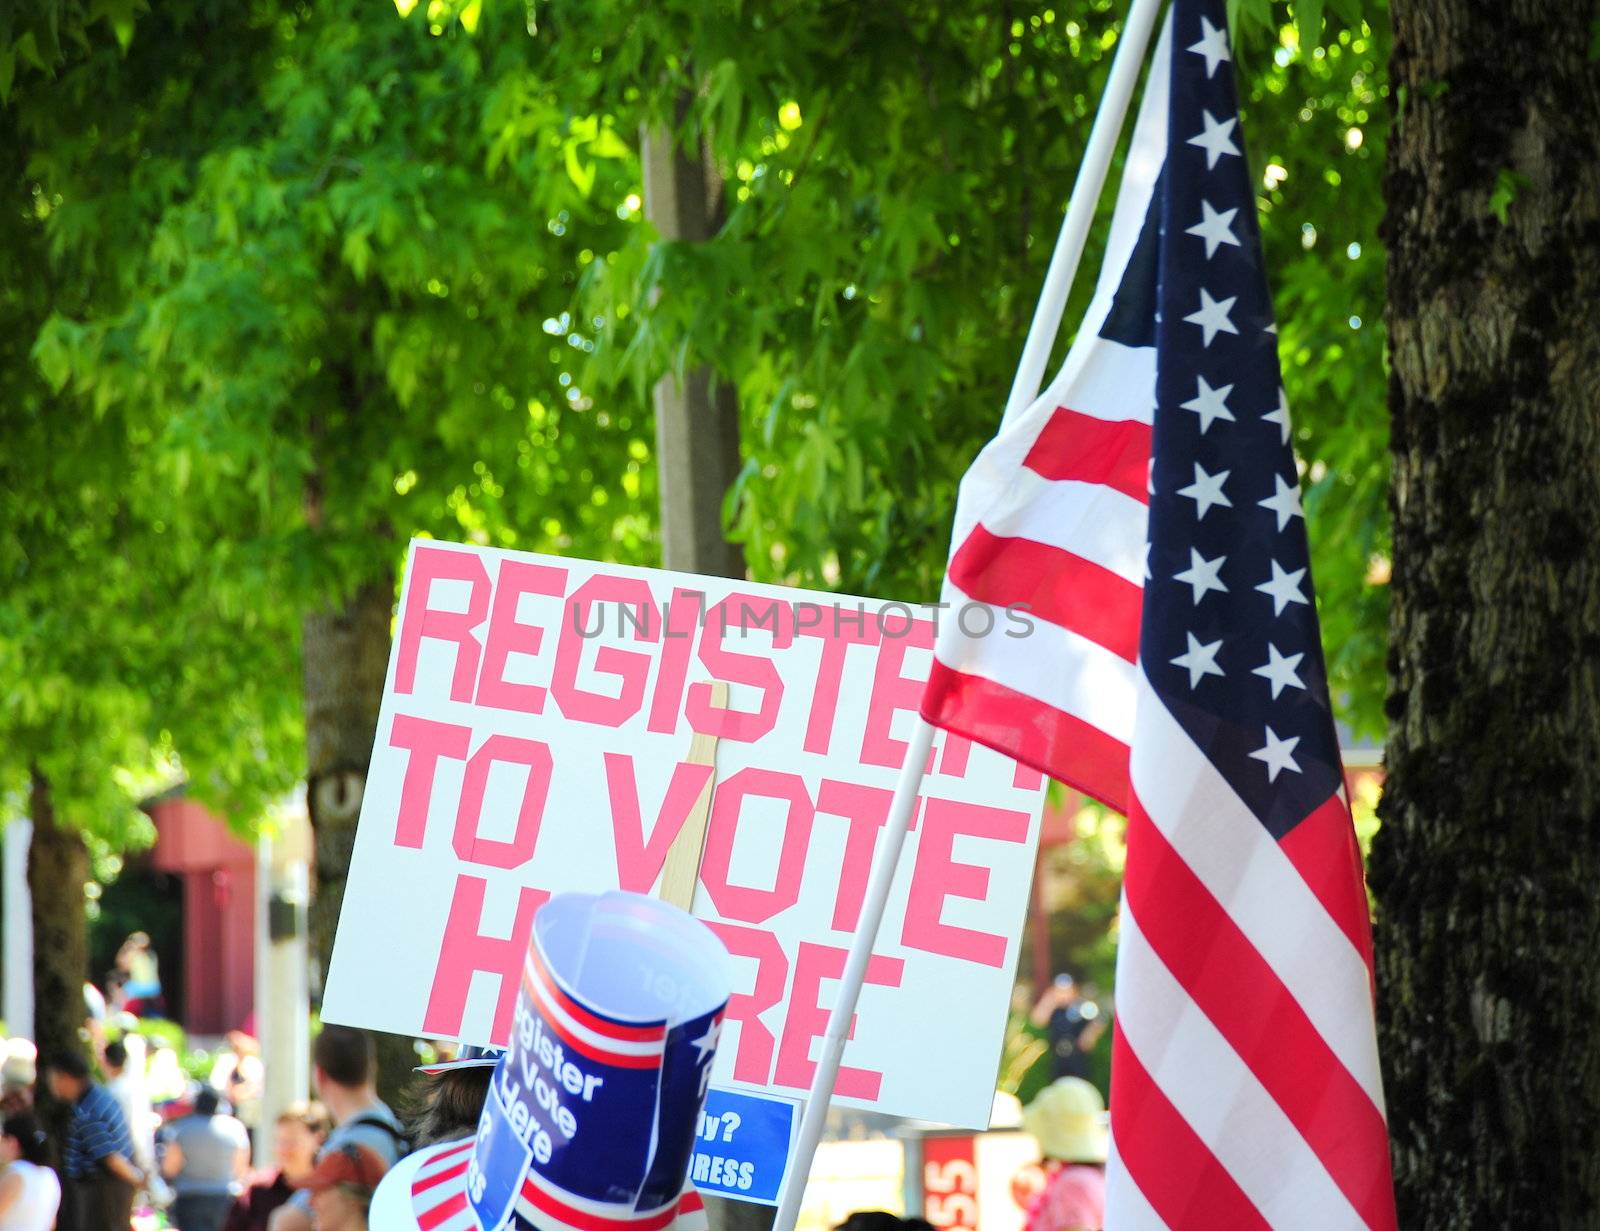 Register to vote sign by oscarcwilliams